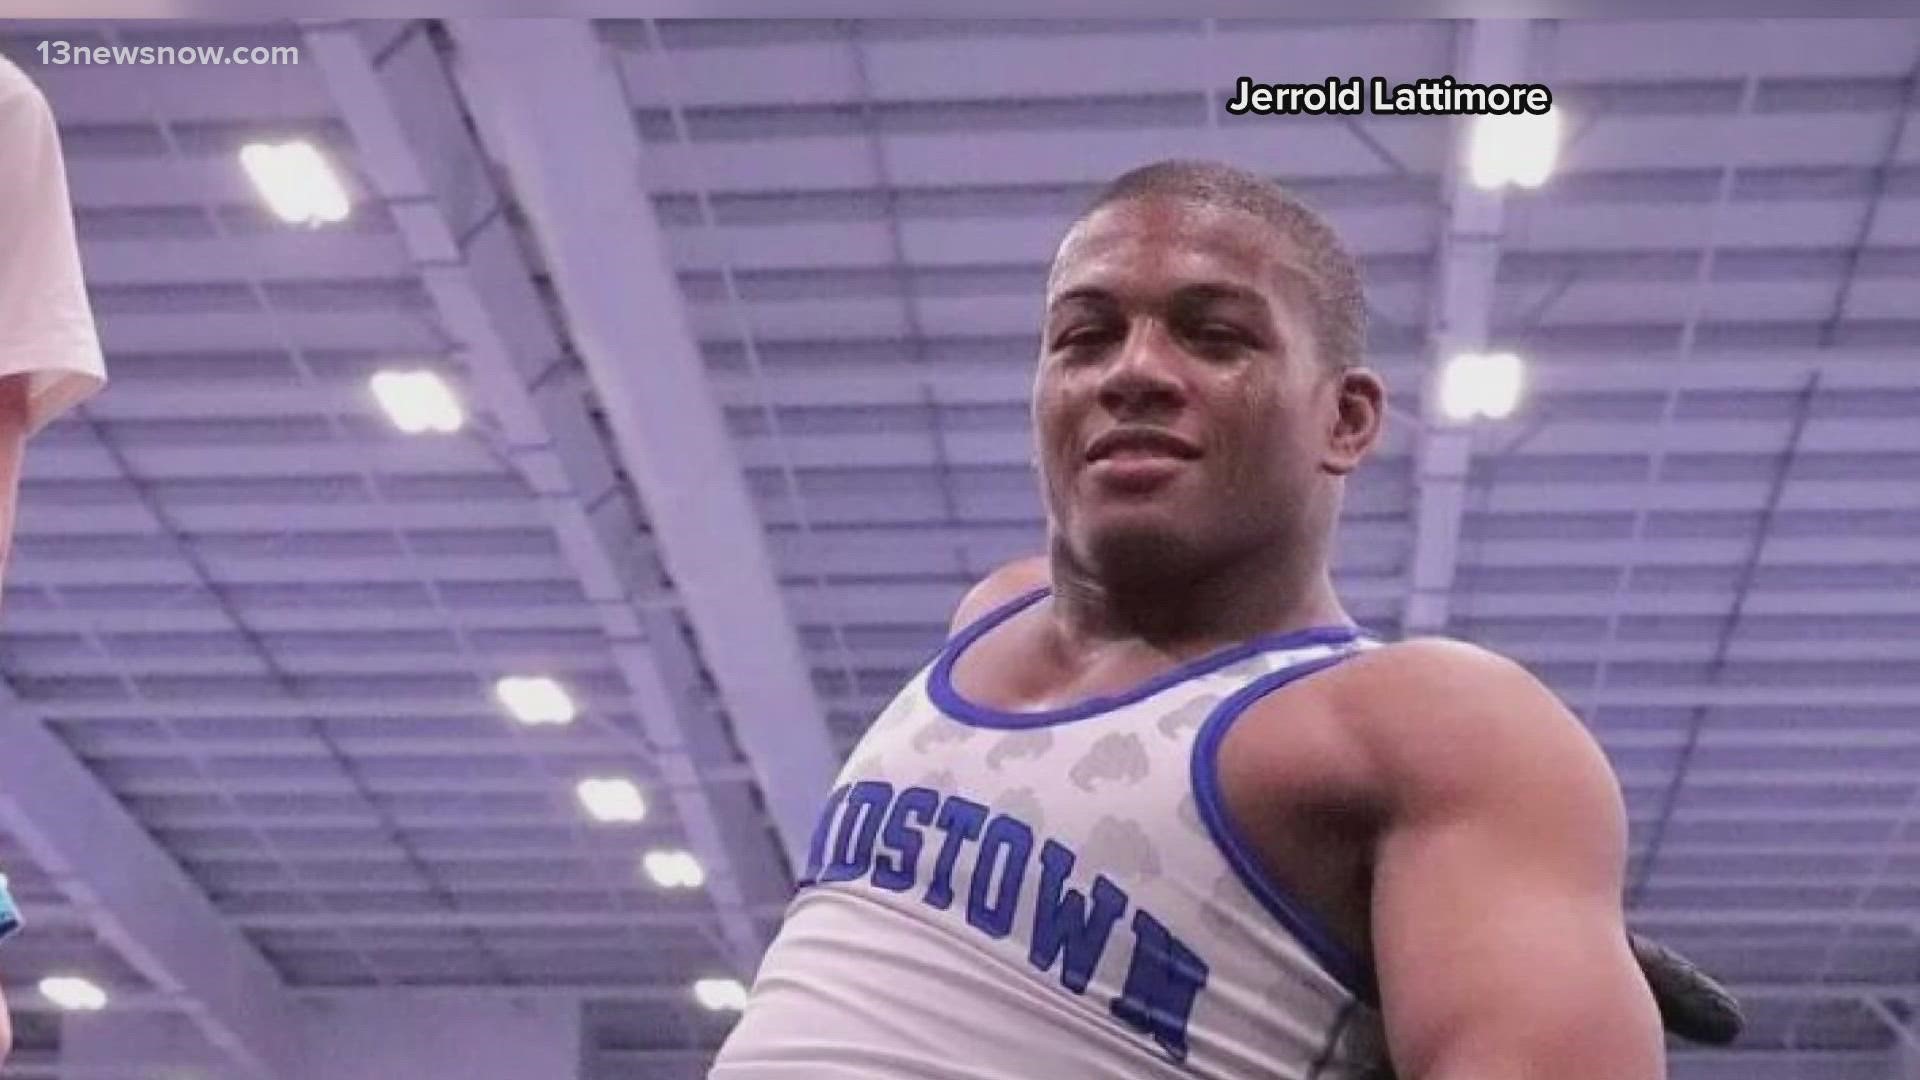 Adonis Lattimore is a state wrestling champ in spite of being born with no right leg and a partial left leg.